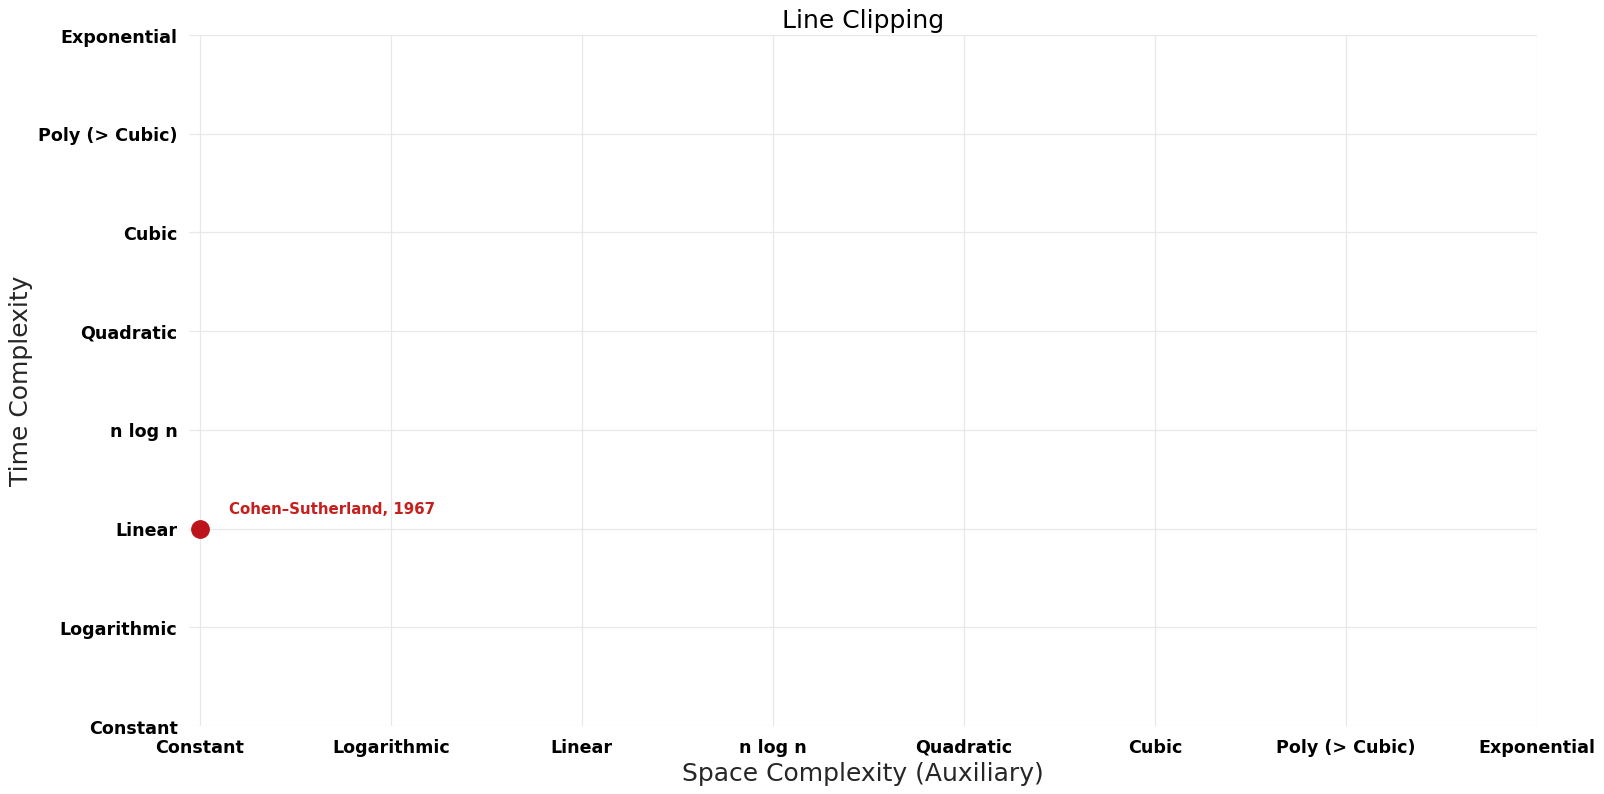 File:Line Clipping - Pareto Frontier.png